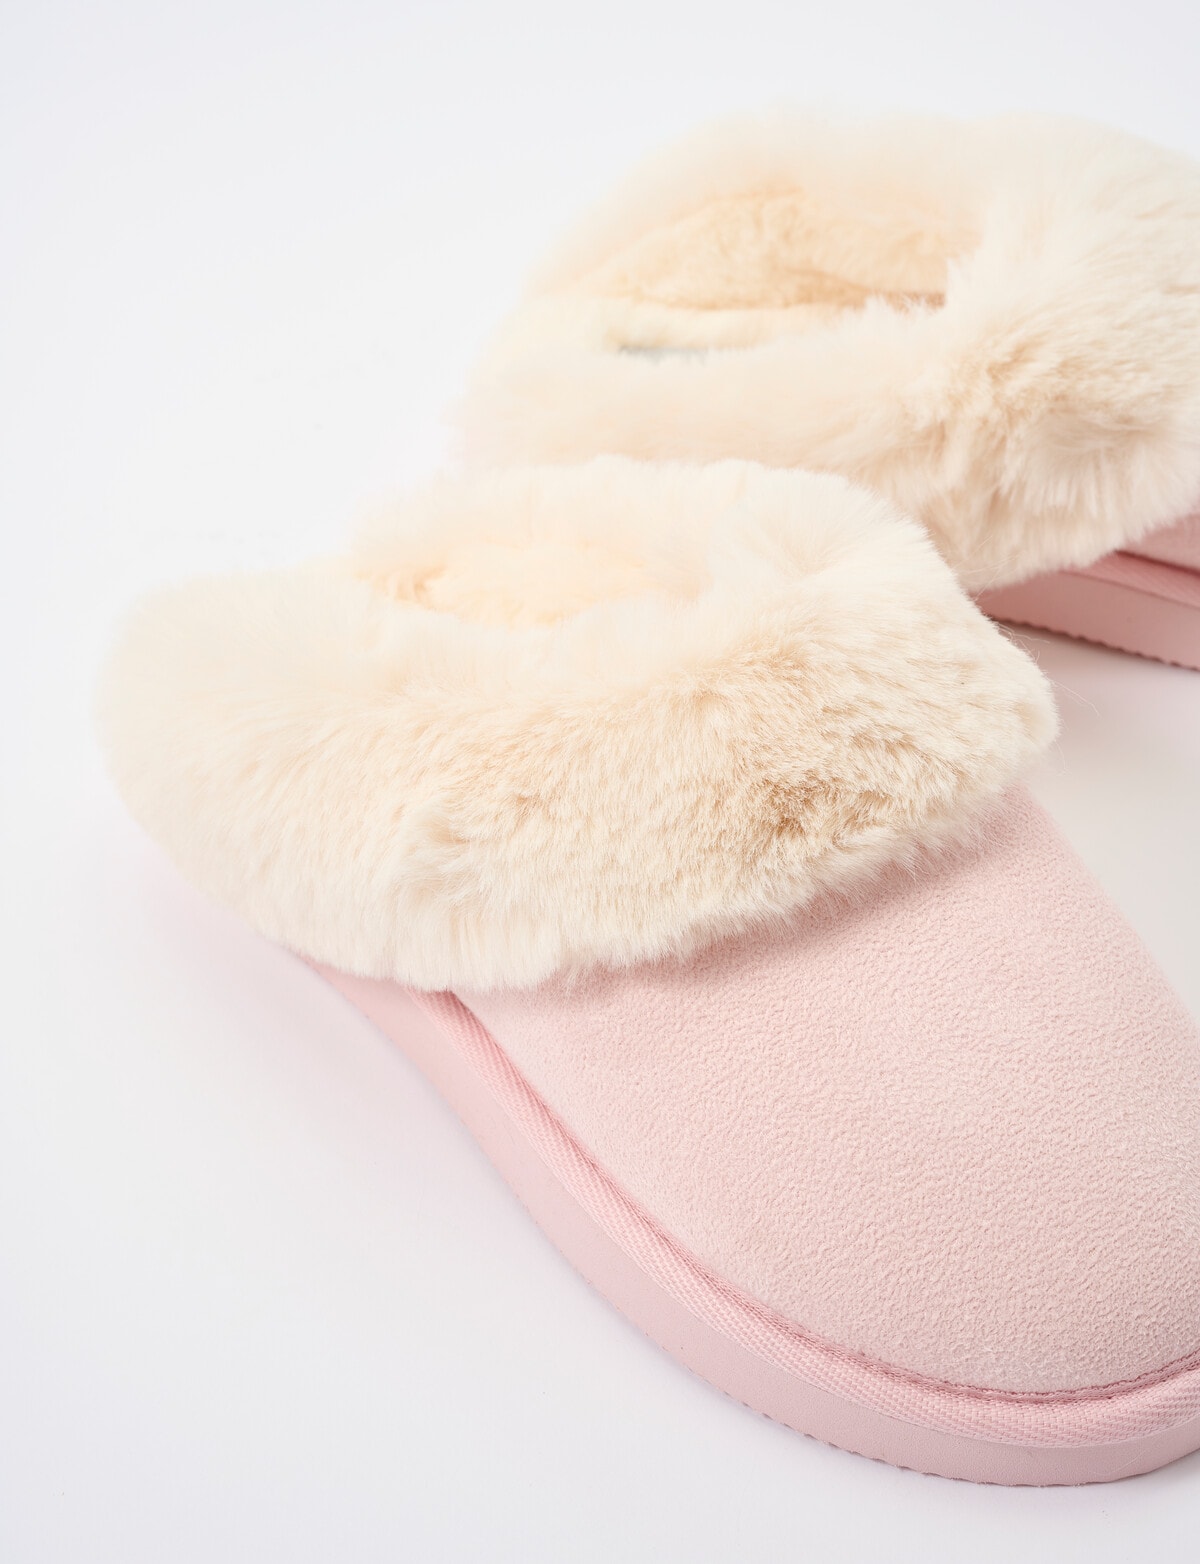 Lyric Lola Faux Suede Scuff Slippers, Light Pink - Slippers